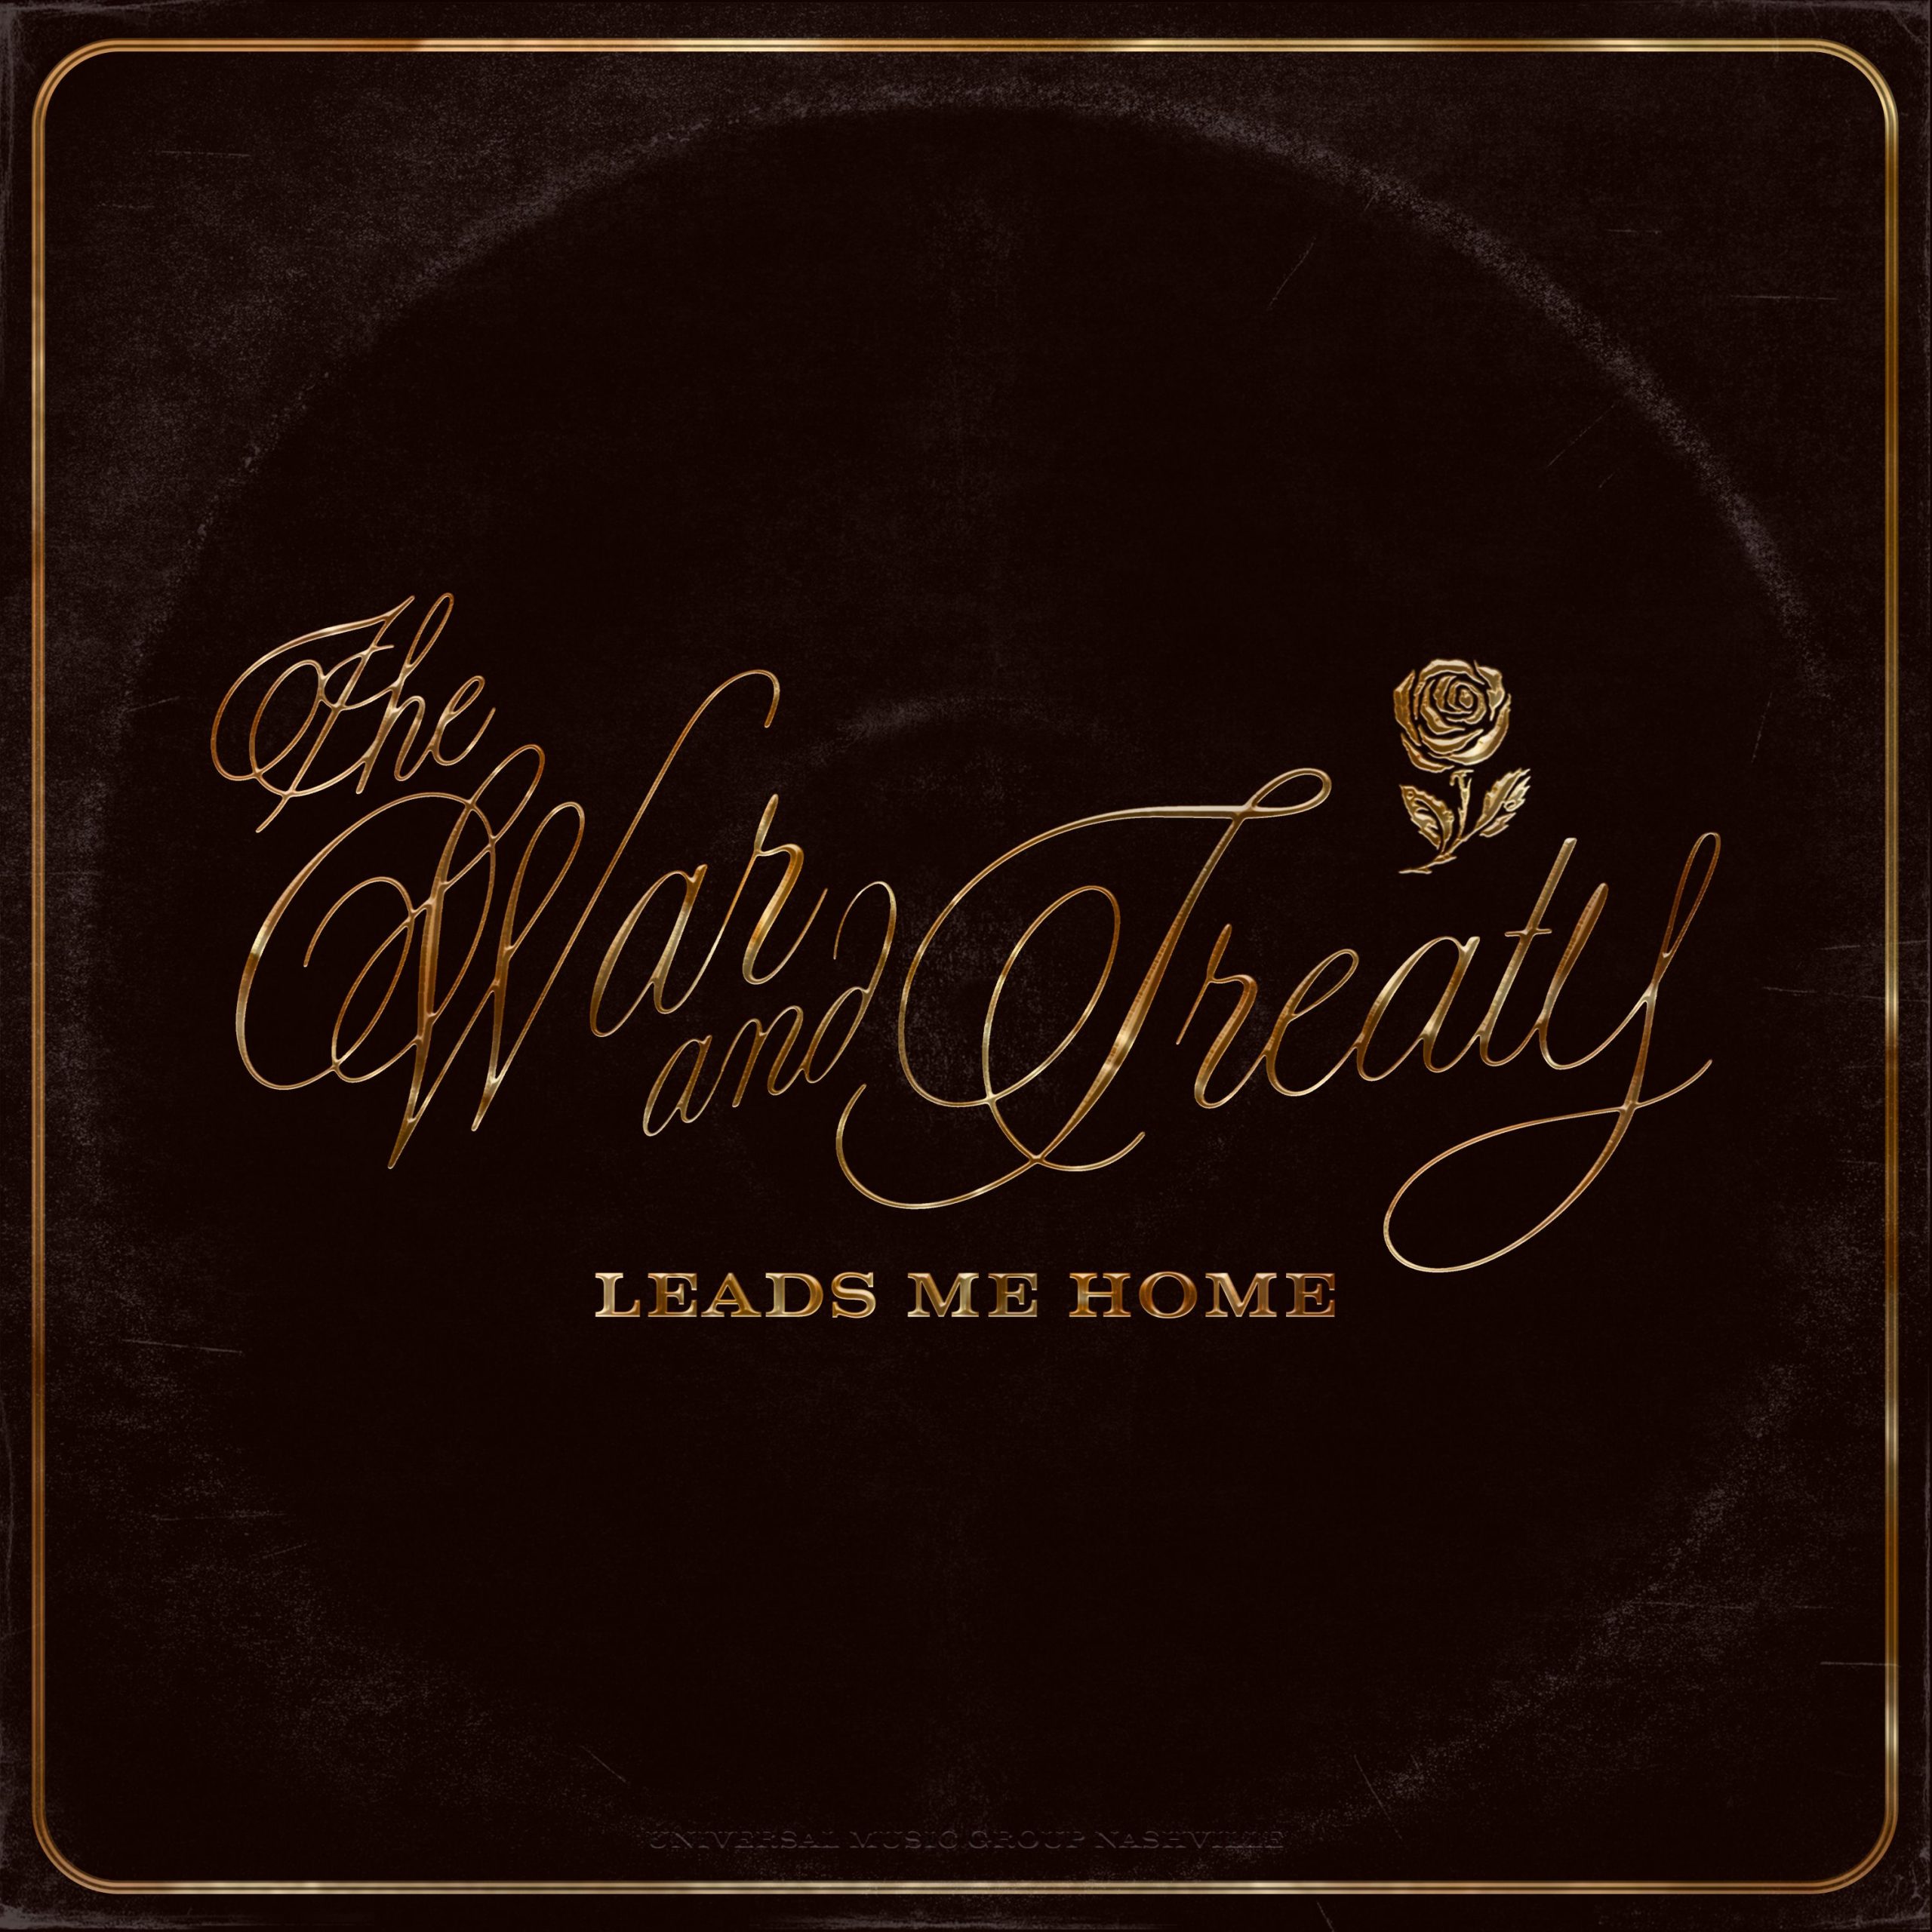 The War And Treaty Releases New Song “Leads Me Home”